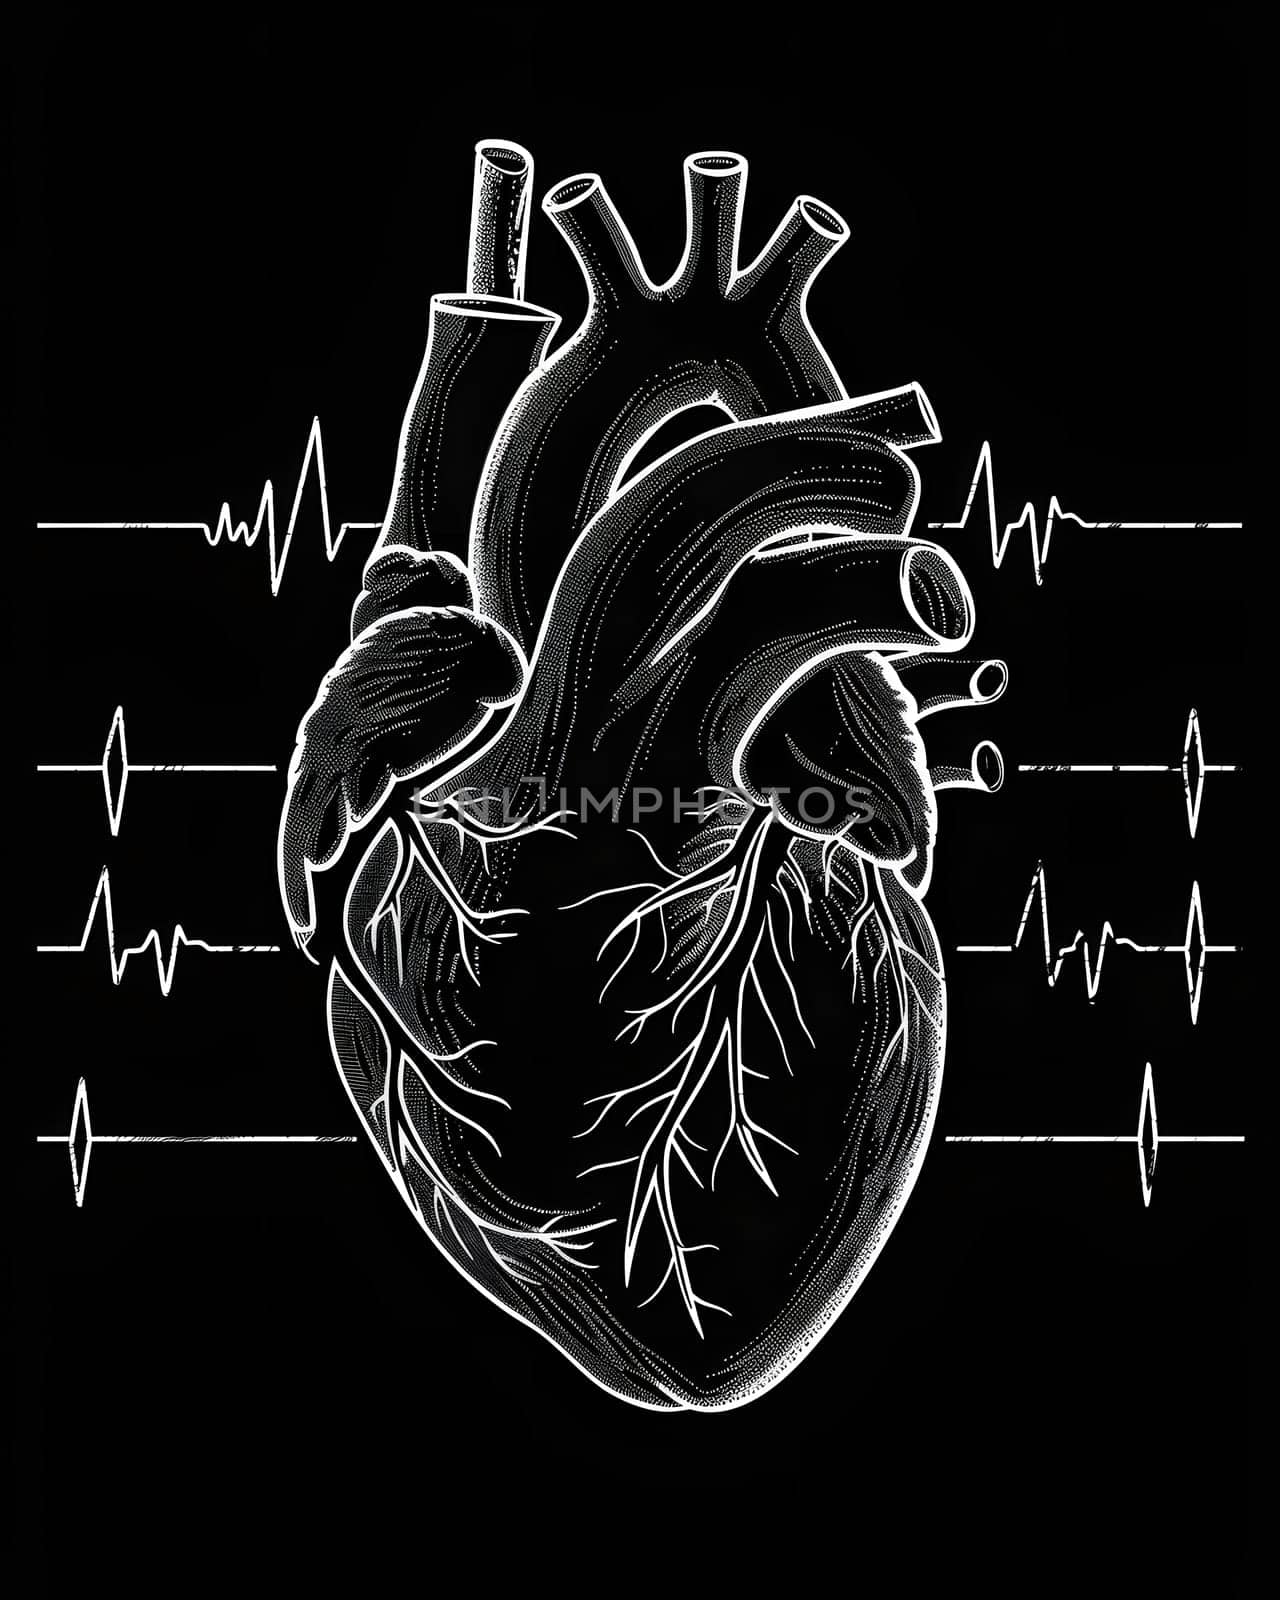 A monochrome drawing of a human heart with heartbeat lines, symbolizing life and vitality. The intricate pattern depicts the heartbeat of an organism in a visually striking gesture of art